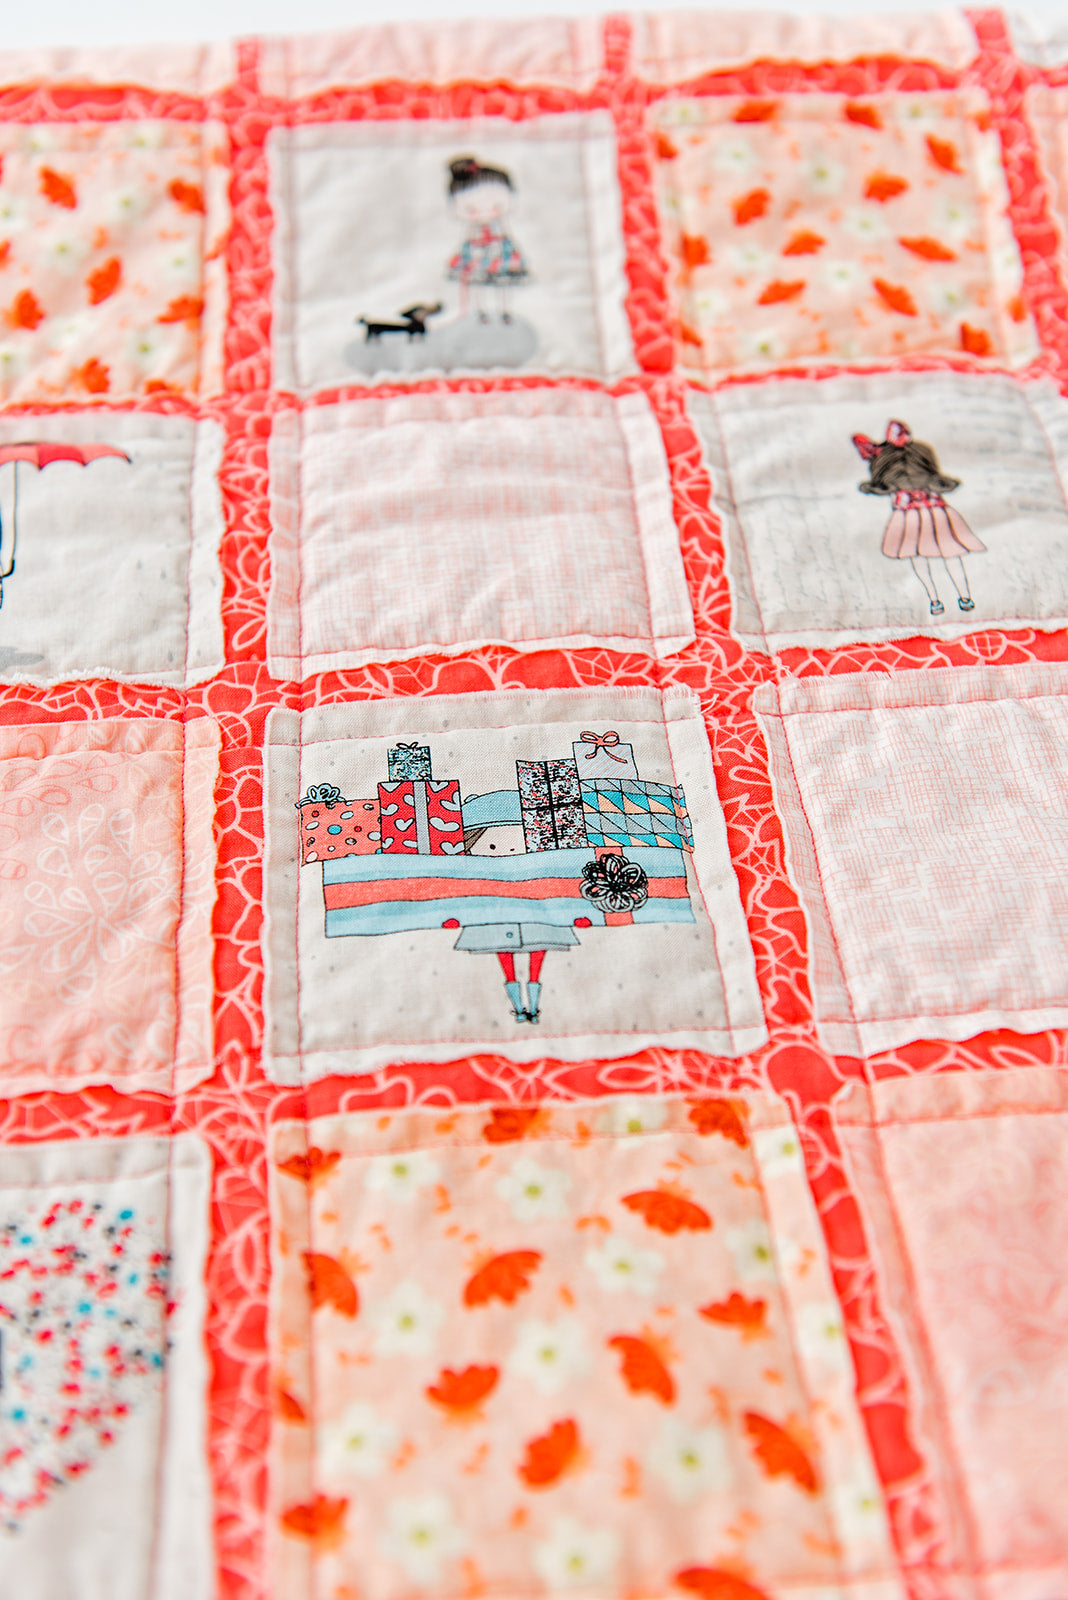 beautiful-handmade-baby-quilt-coral-mint-hot-pink-blanket-from-sugar-owl-design